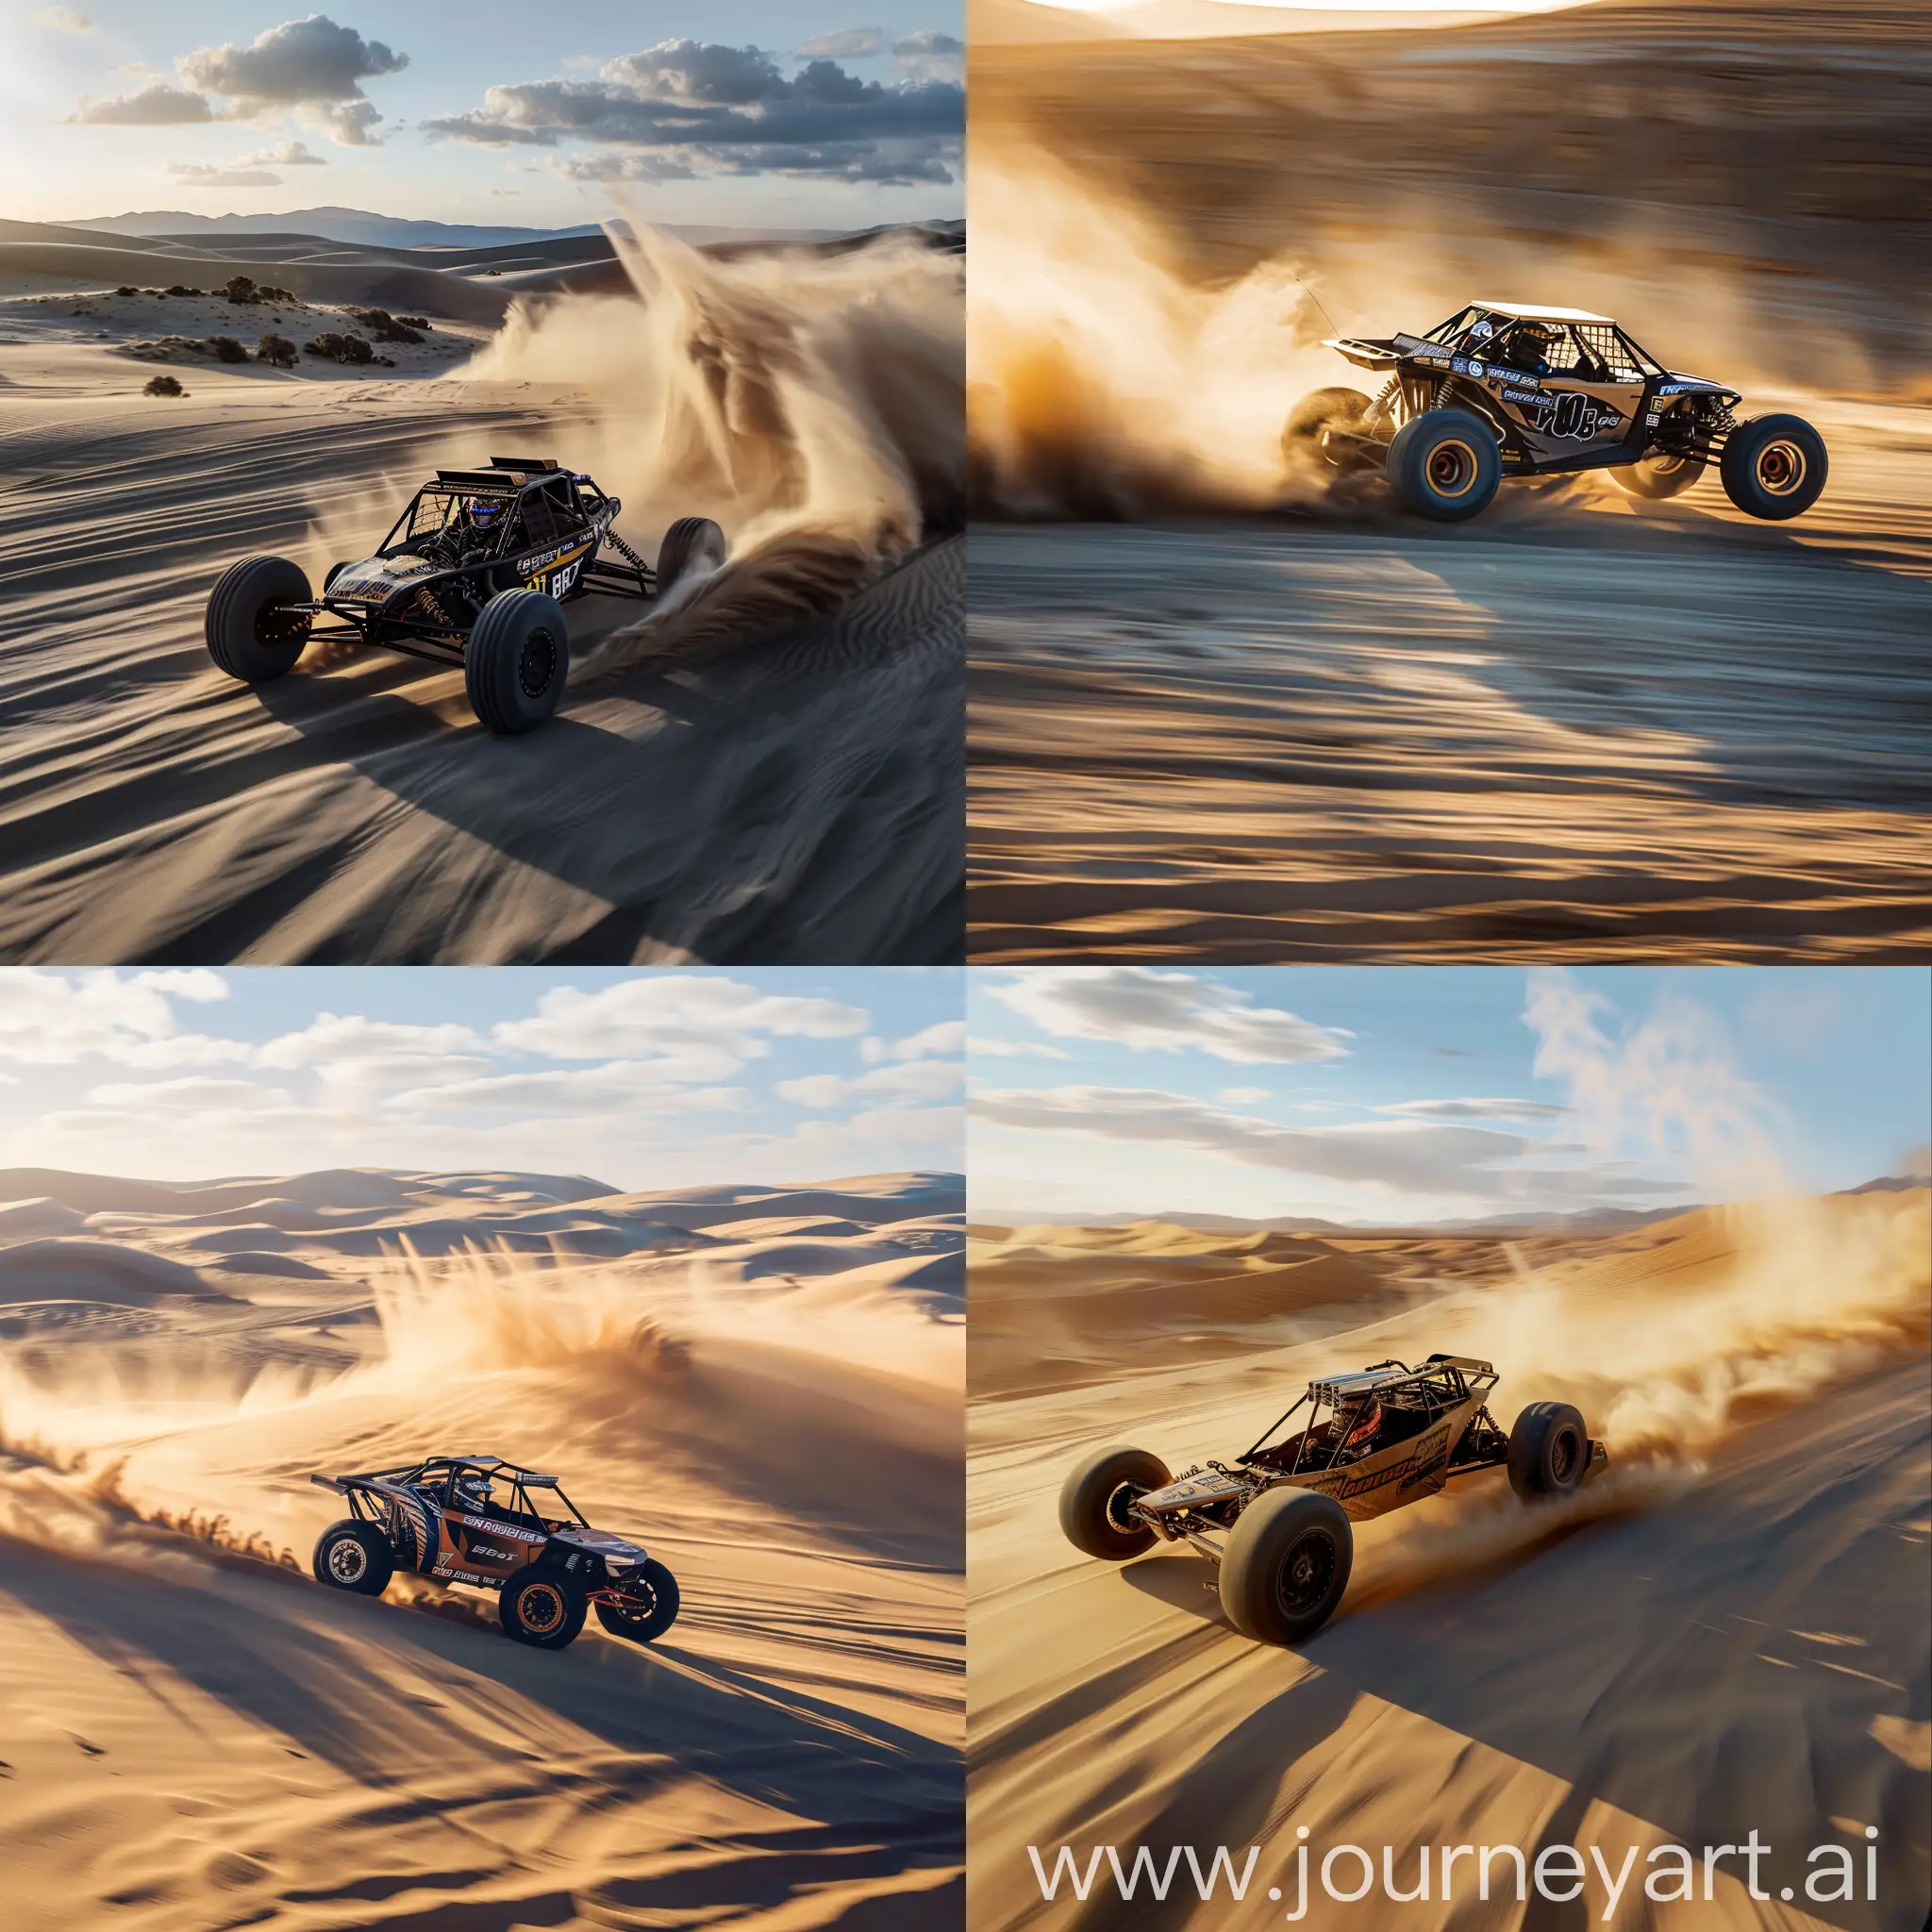 Dynamic action shot, off-road racing buggy mid-drift, desert dunes, telephoto lens likely 70-200mm f/2.8, high shutter speed approx. 1/1000 sec, low ISO, possibly around 100, aperture wide open to isolate subject and motion, tripod or monopod for stability, high resolution, sharp focus, polarizing filter to enhance blues and manage reflections, late afternoon golden hour lighting, long shadows, enhanced contrast, dust cloud texture emphasized. --style raw 